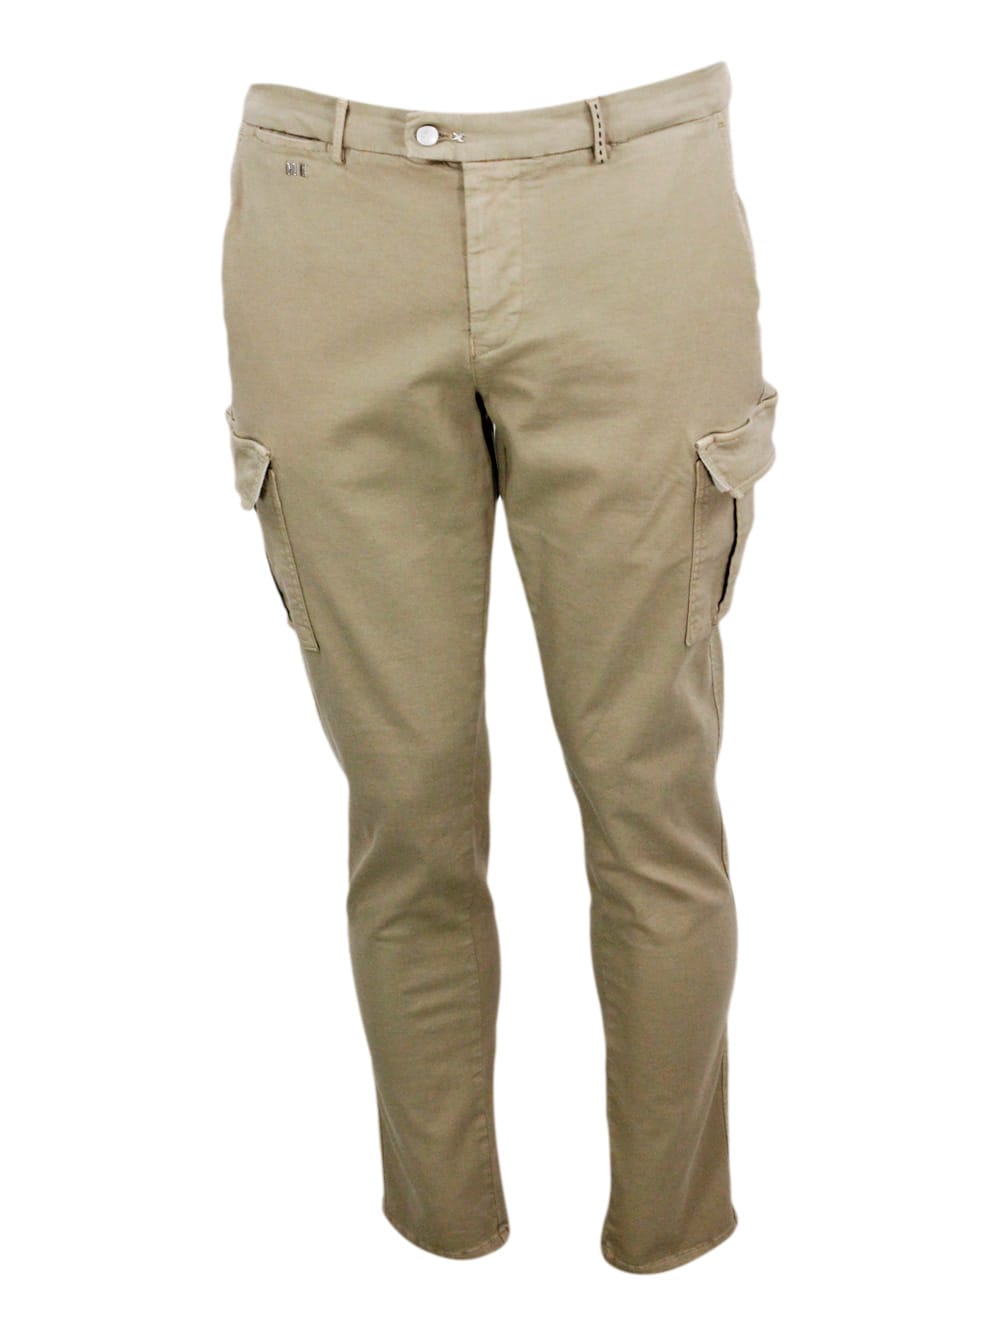 Sartoria Tramarossa Amerigo Acargo Model Trousers With Large Slim Zip Pockets In Soft Cotton With Chino Pockets And Tail In Beige